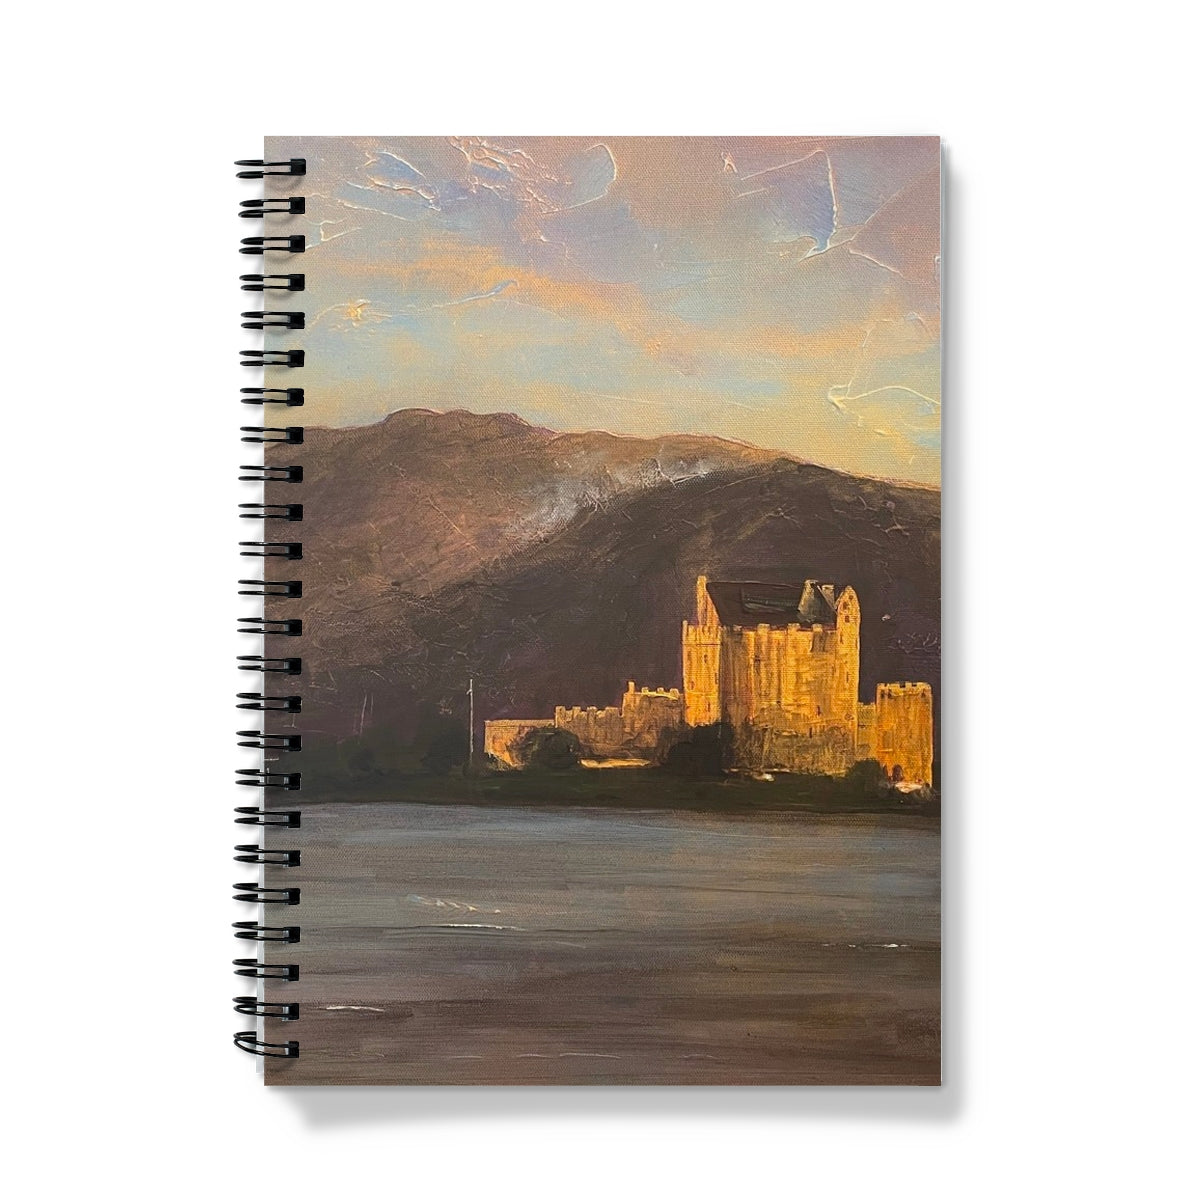 Eilean Donan Castle Art Gifts Notebook-Journals & Notebooks-Historic & Iconic Scotland Art Gallery-A4-Graph-Paintings, Prints, Homeware, Art Gifts From Scotland By Scottish Artist Kevin Hunter